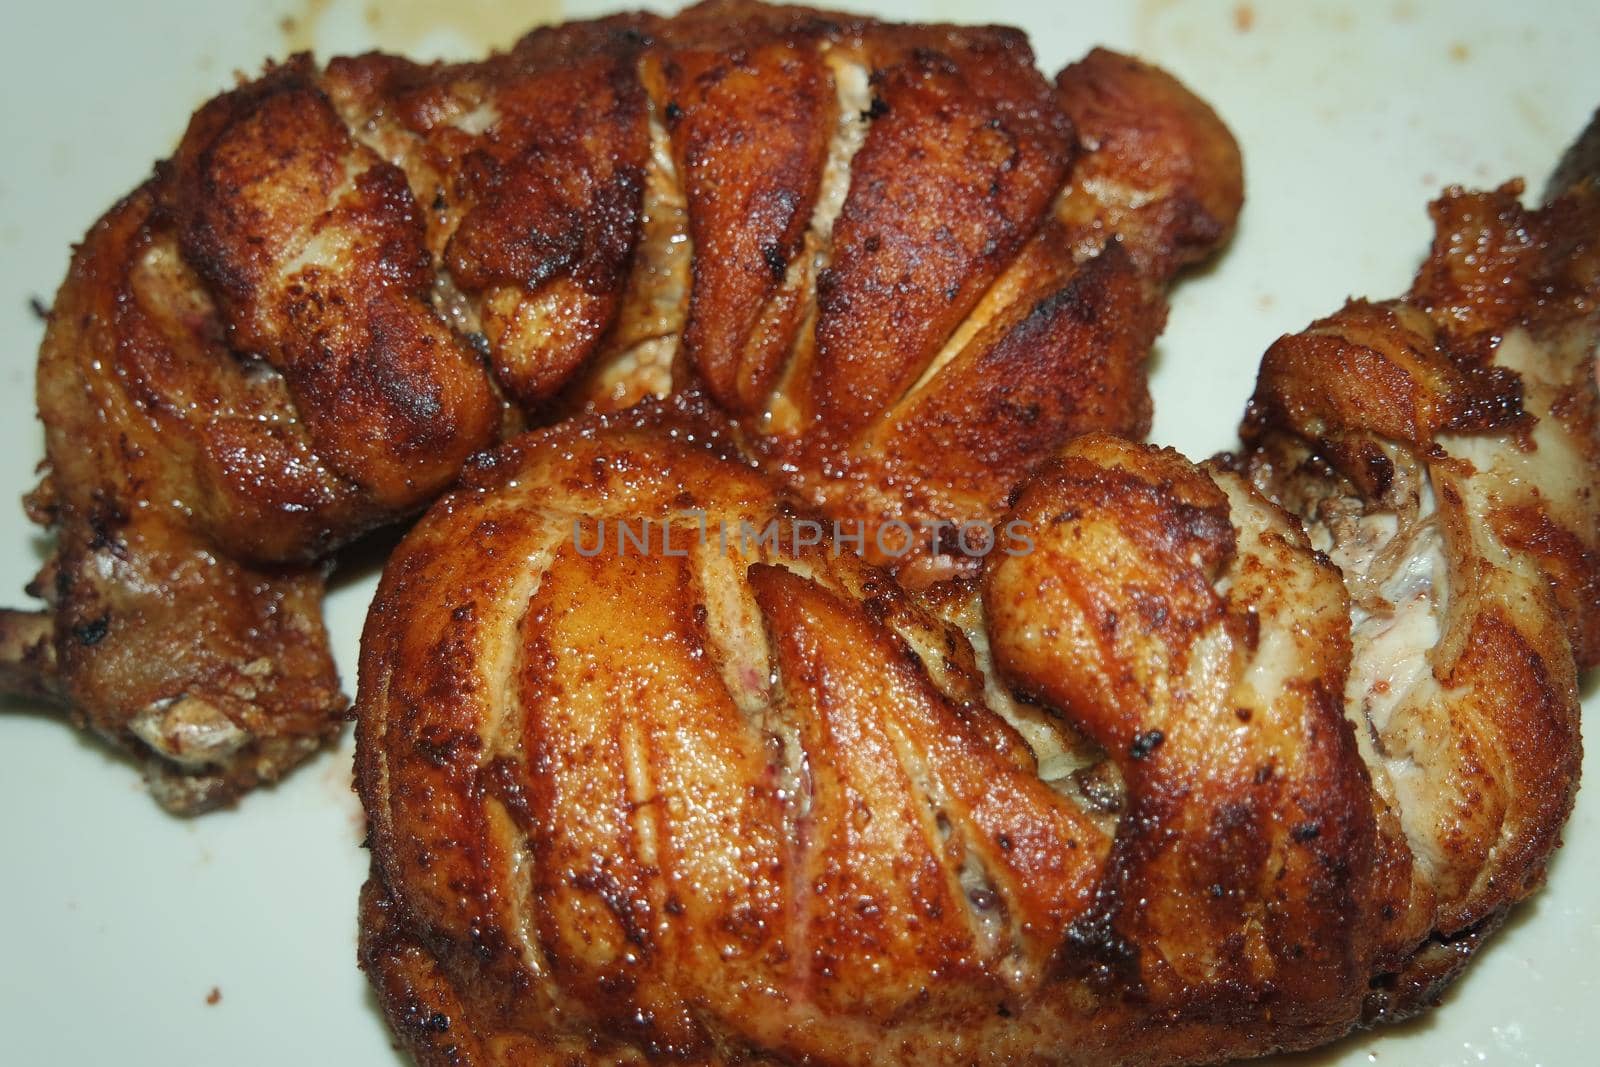 Fried, grilled baked chicken pieces with marinated spices on it. Tasty delicious fried chicken barbecue